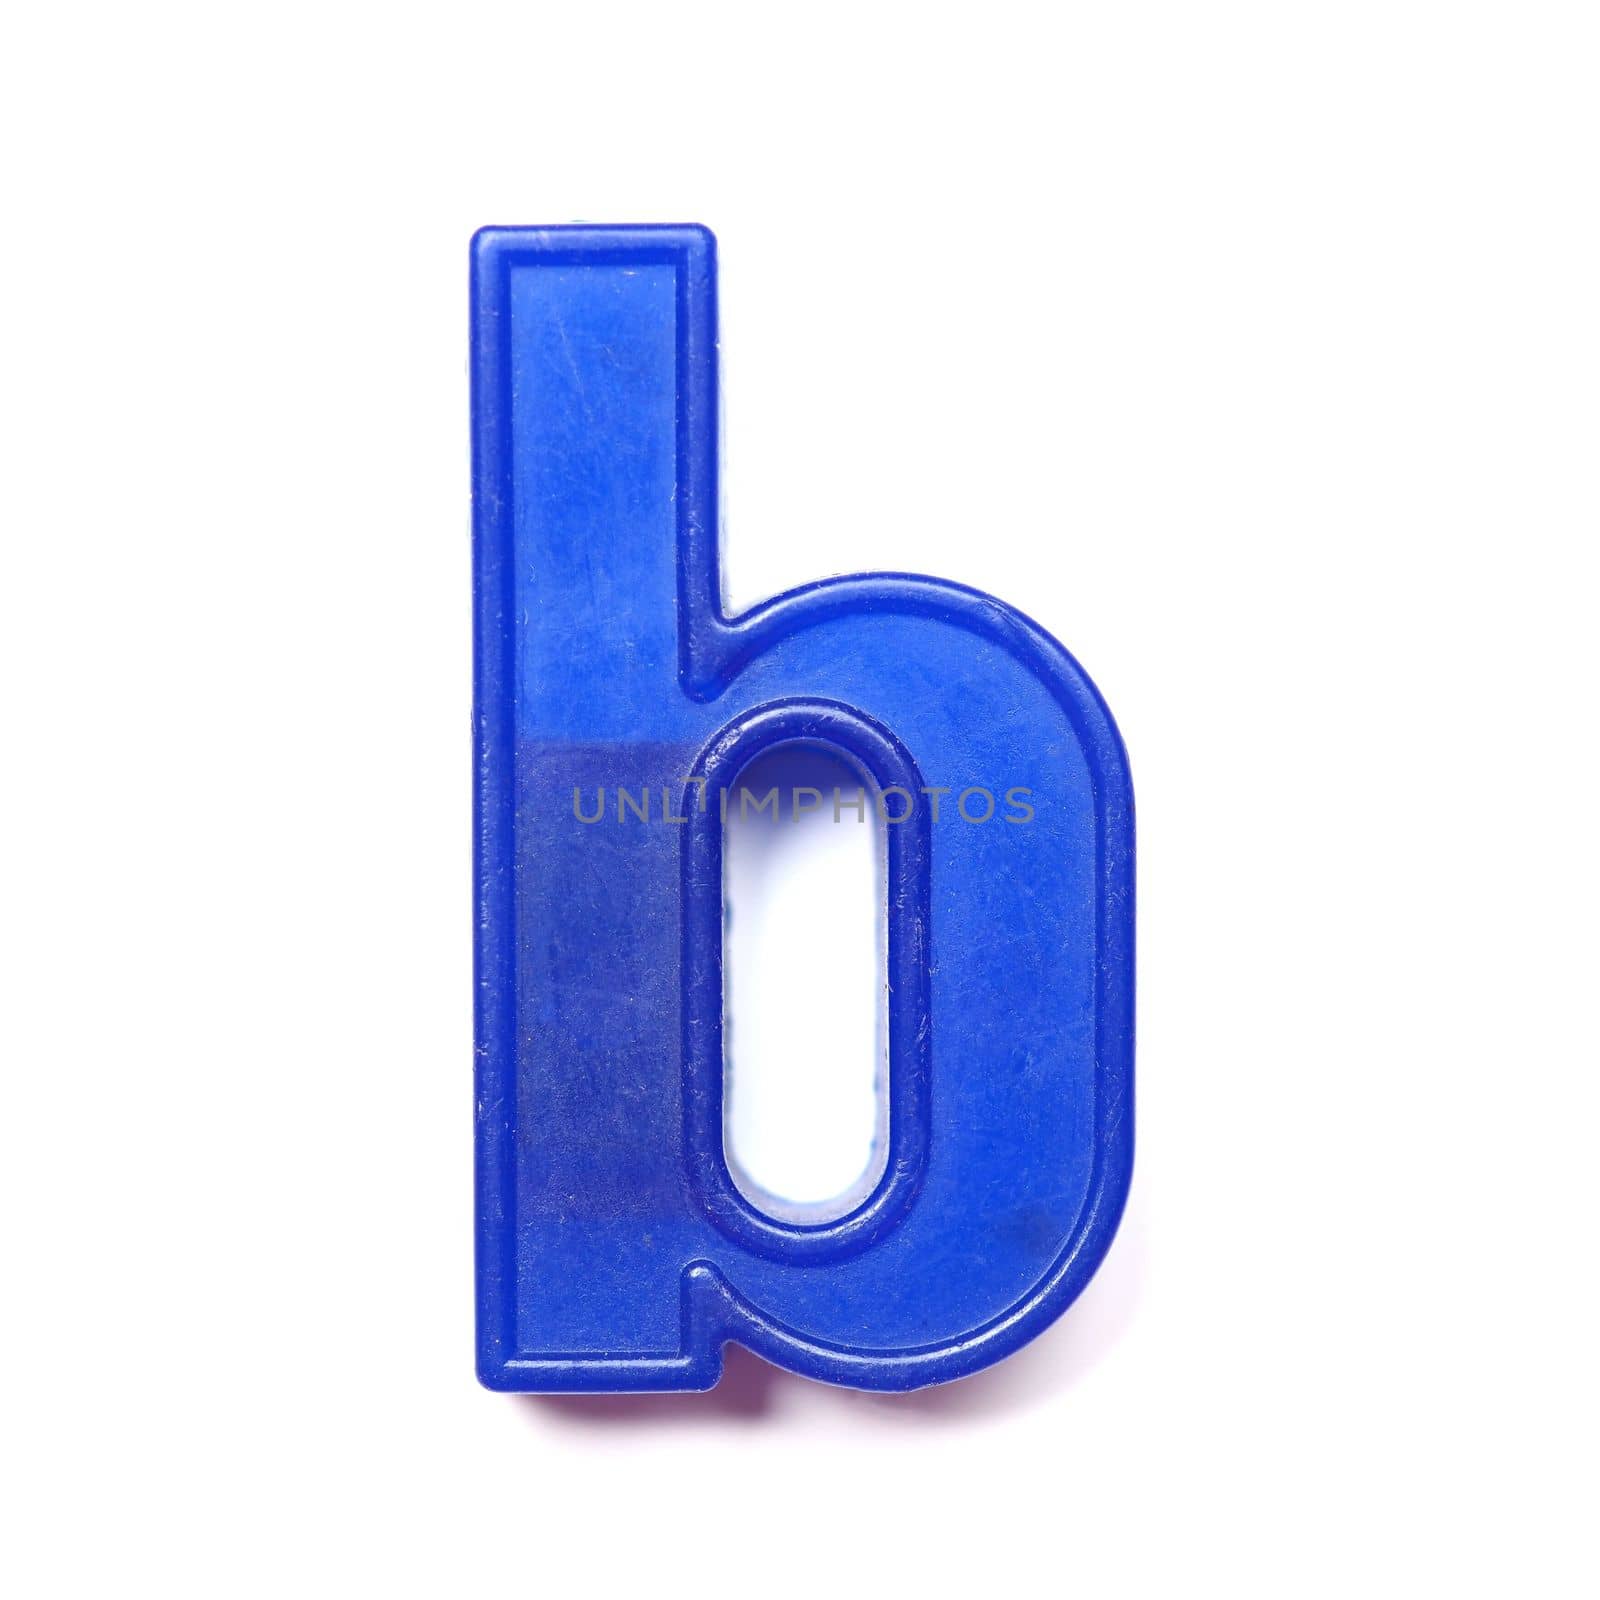 Magnetic lowercase letter B by claudiodivizia